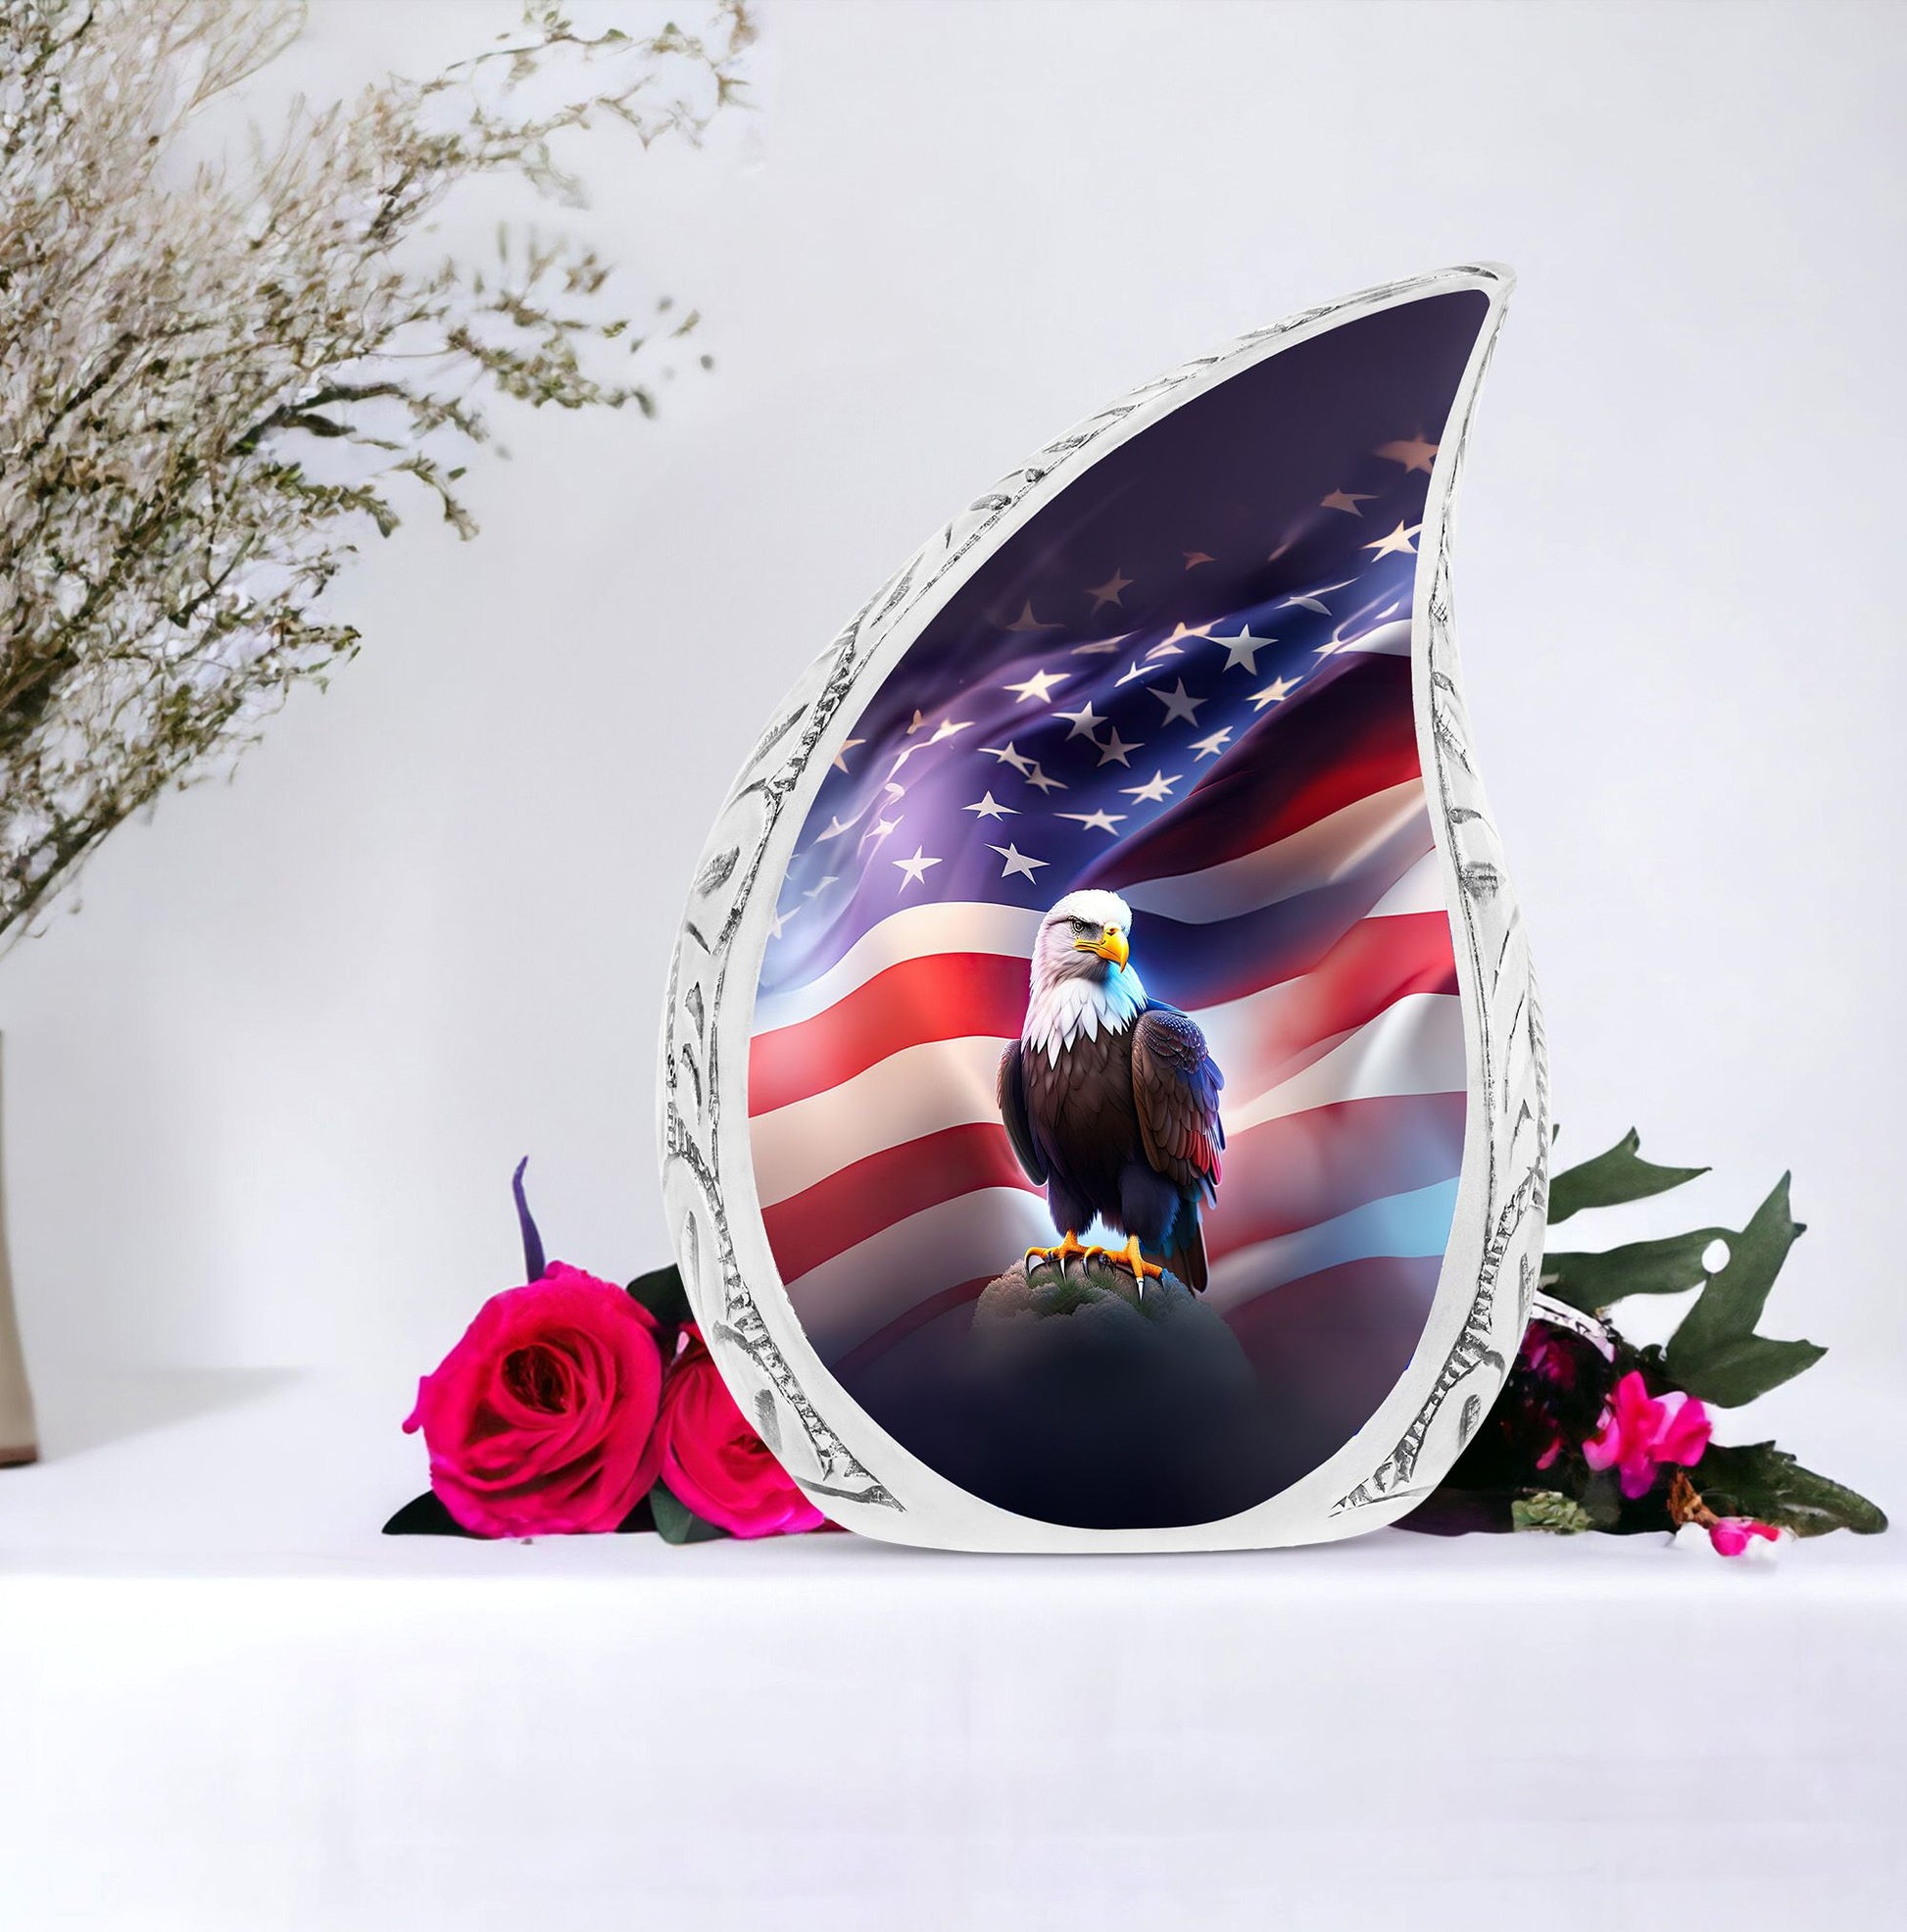 Large, American Pride cremation urn for human ashes, perfect memorials for men, decorative to honor your loved one